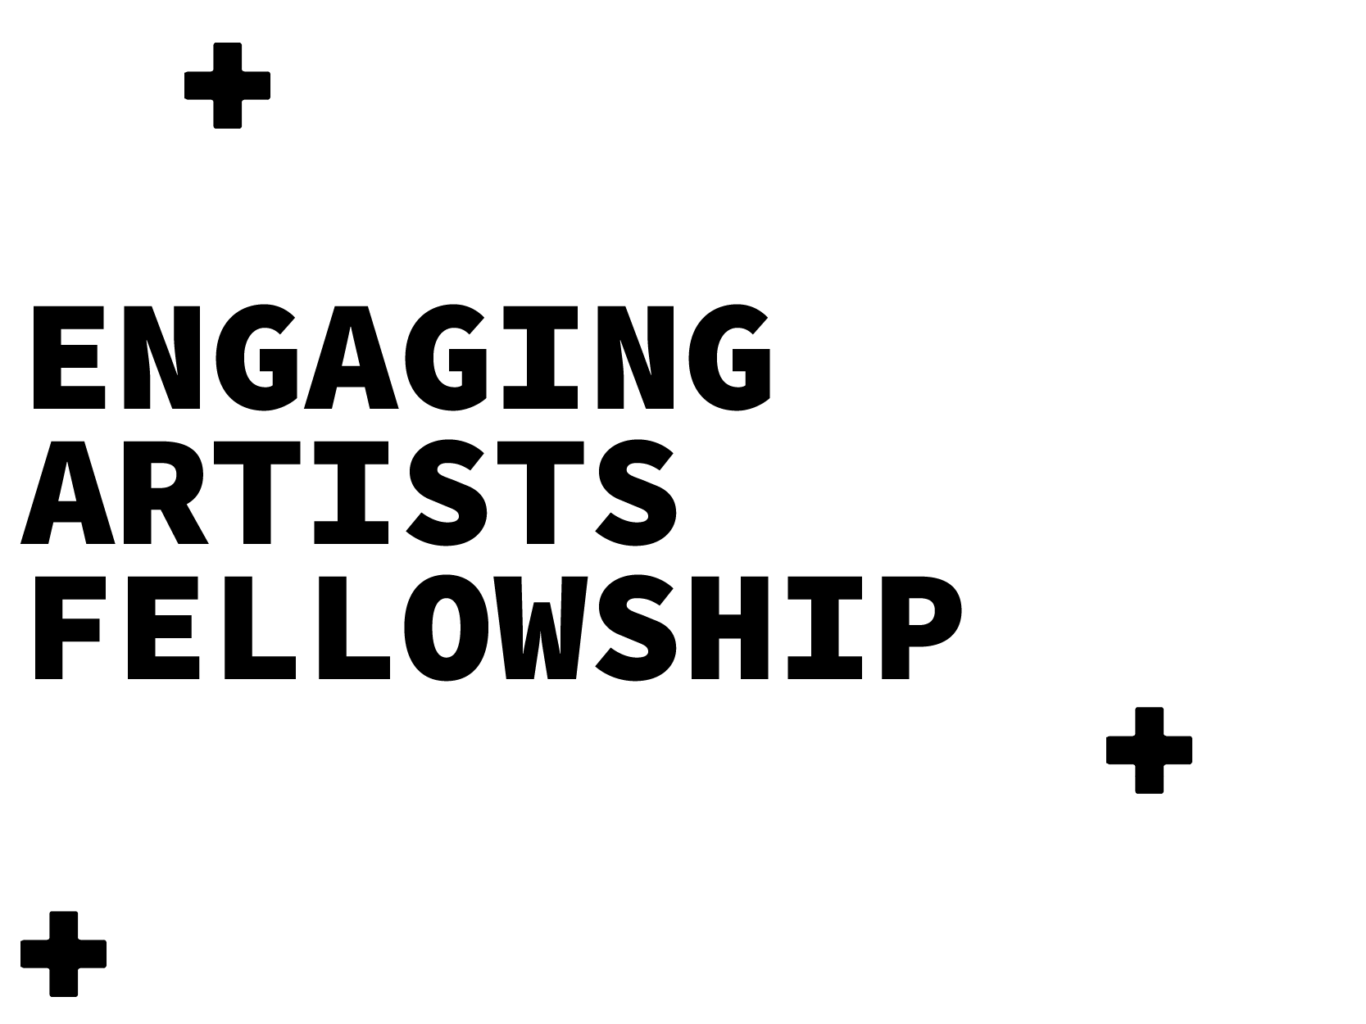 Engaging Artists Fellowship title text